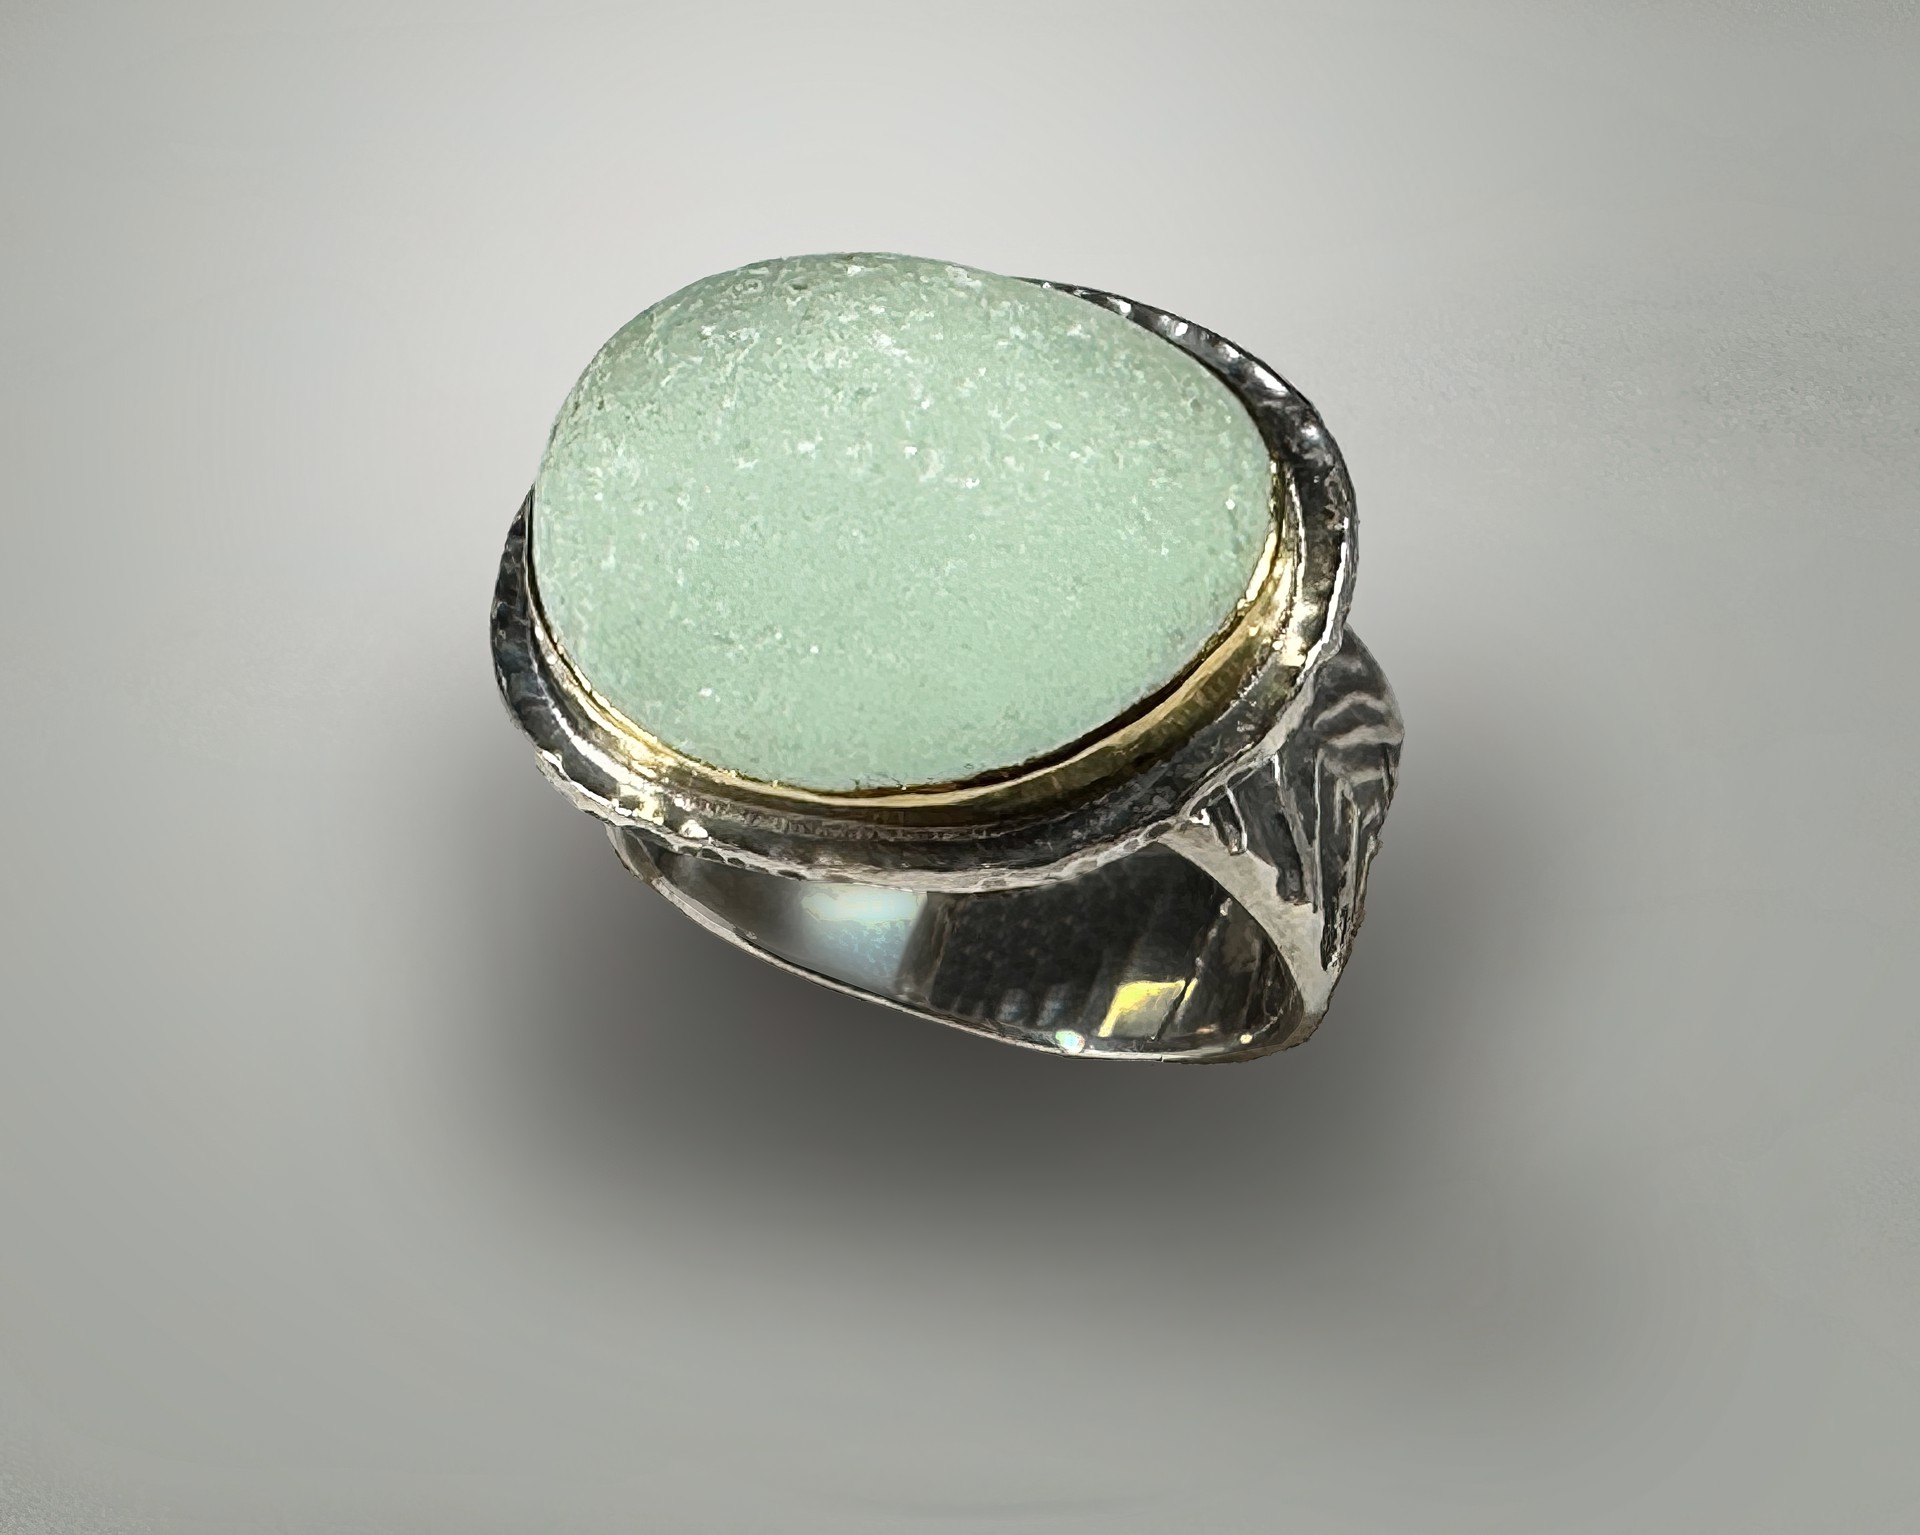 English Salt Water, Frosted Aqua Seaglass Ring by Judith Altruda